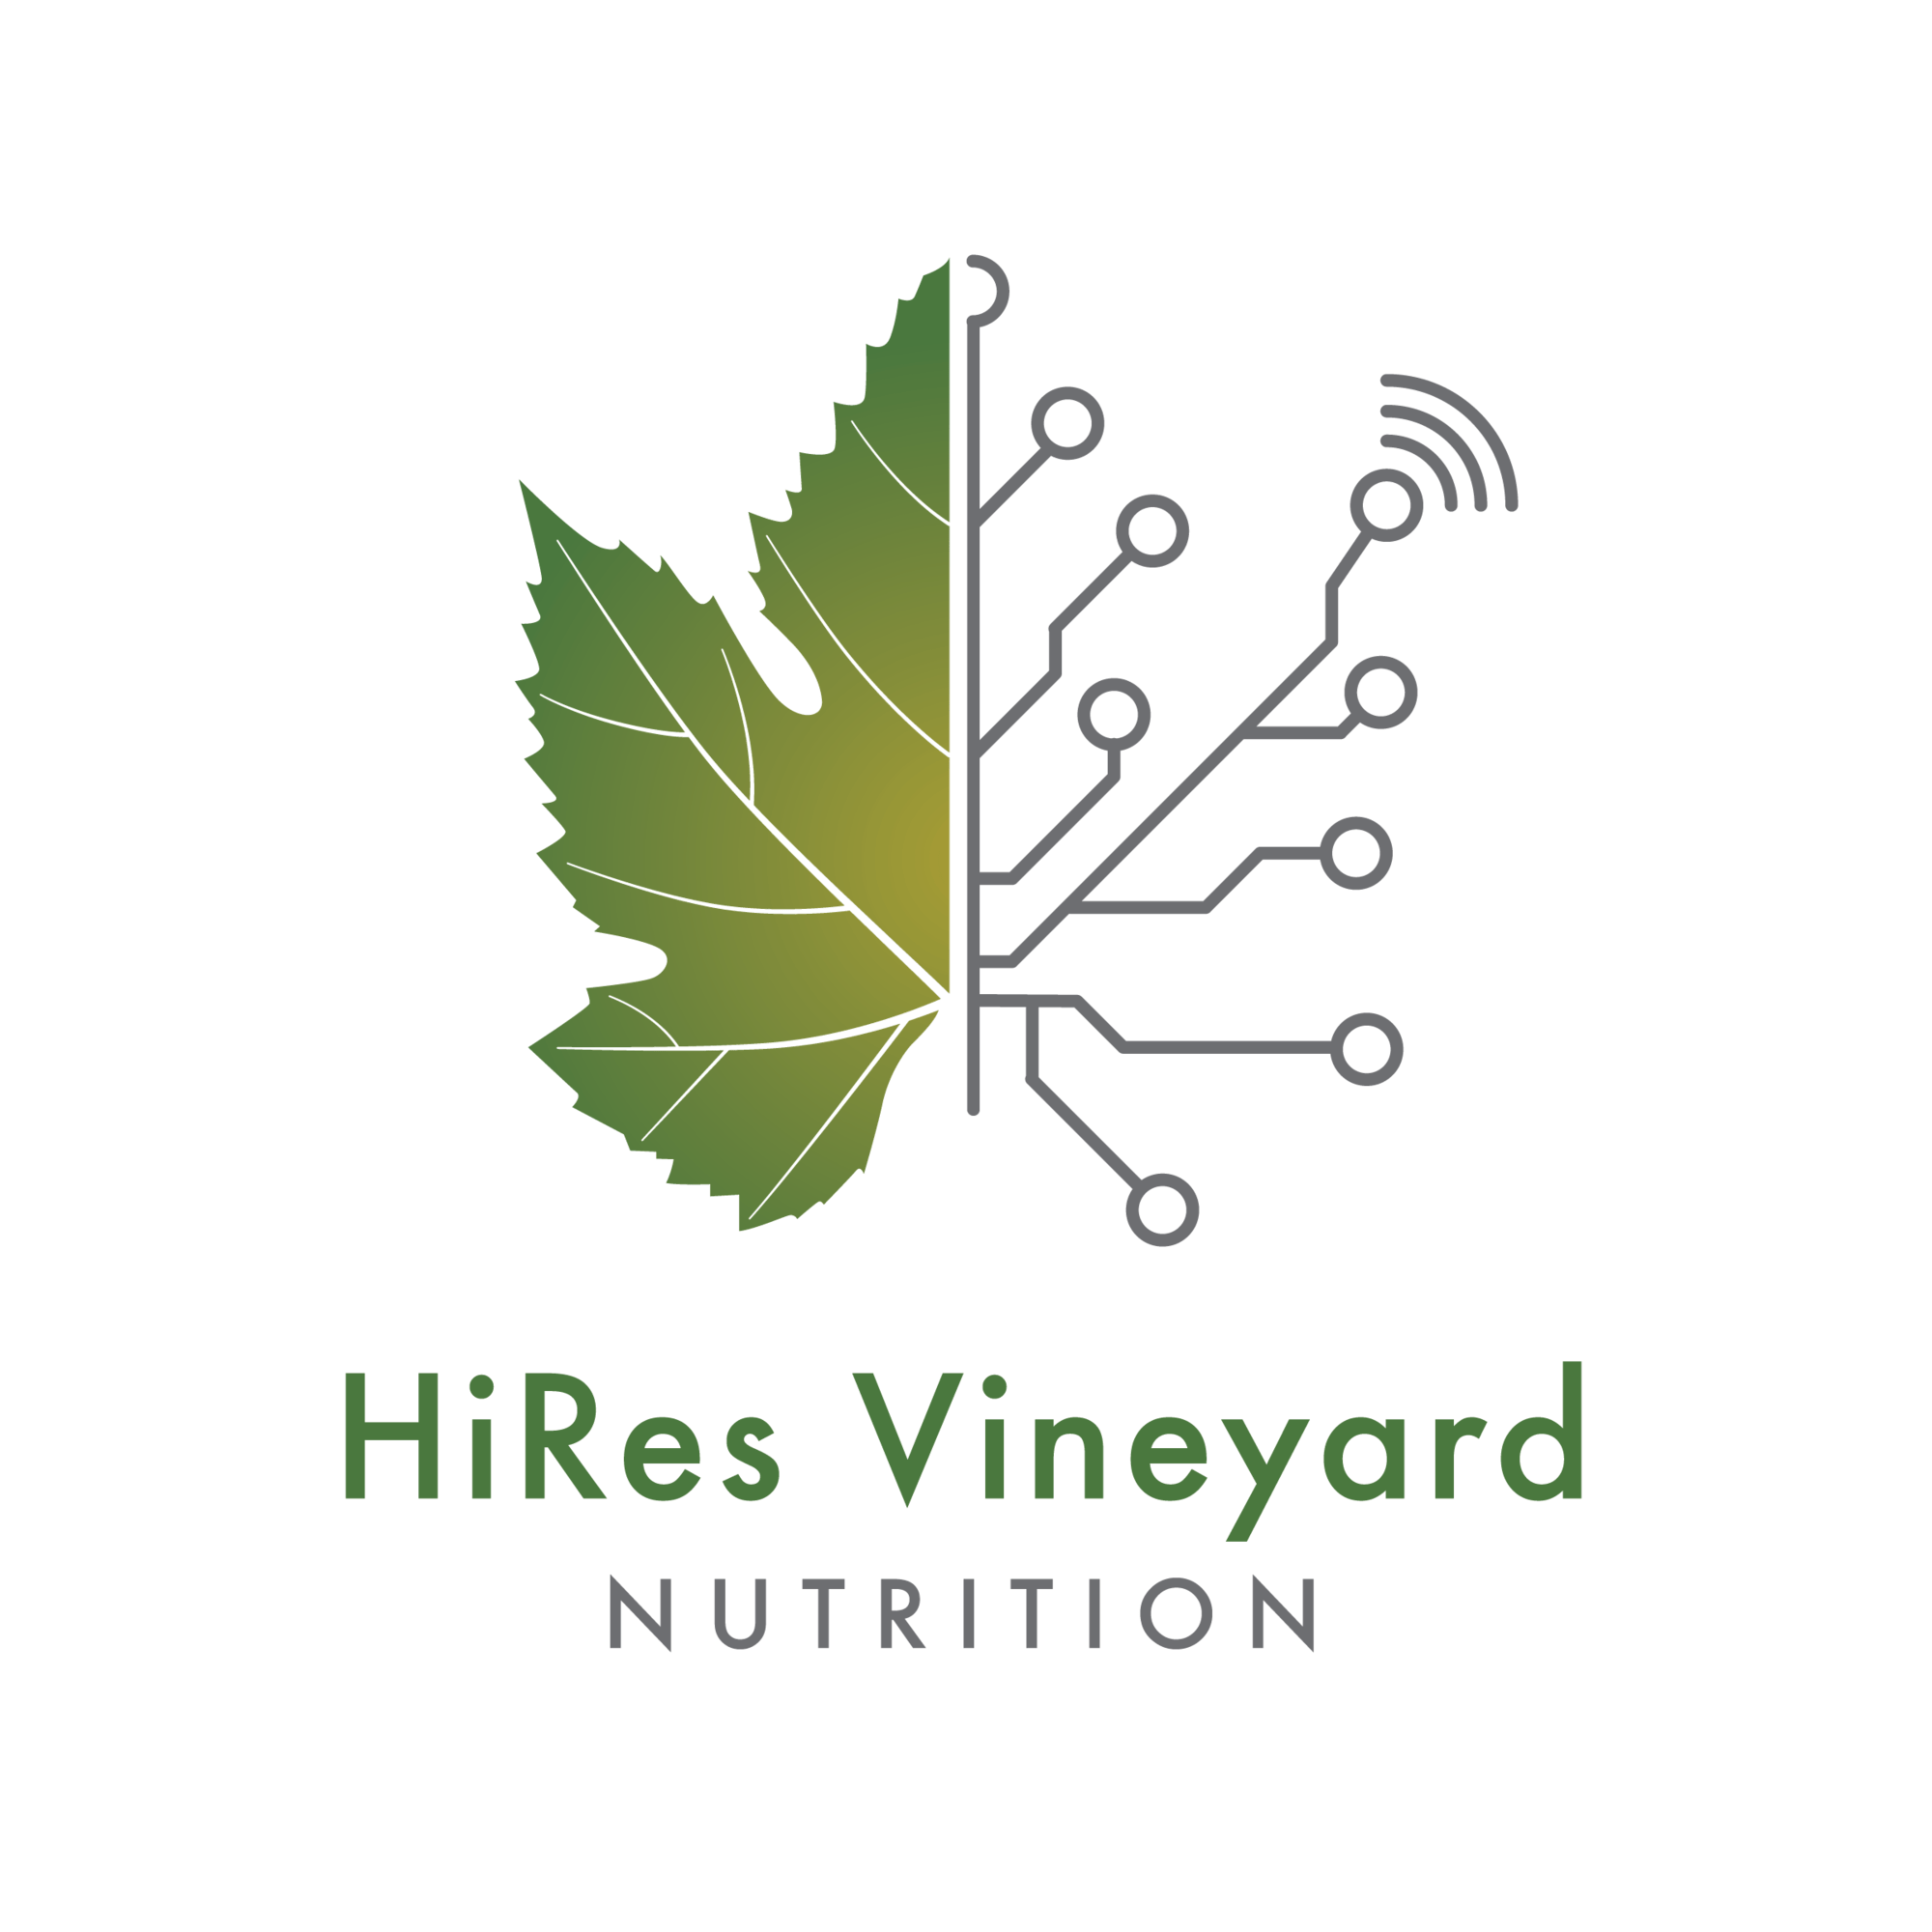 Logo for the High Resolution Vineyard Nutrition Project